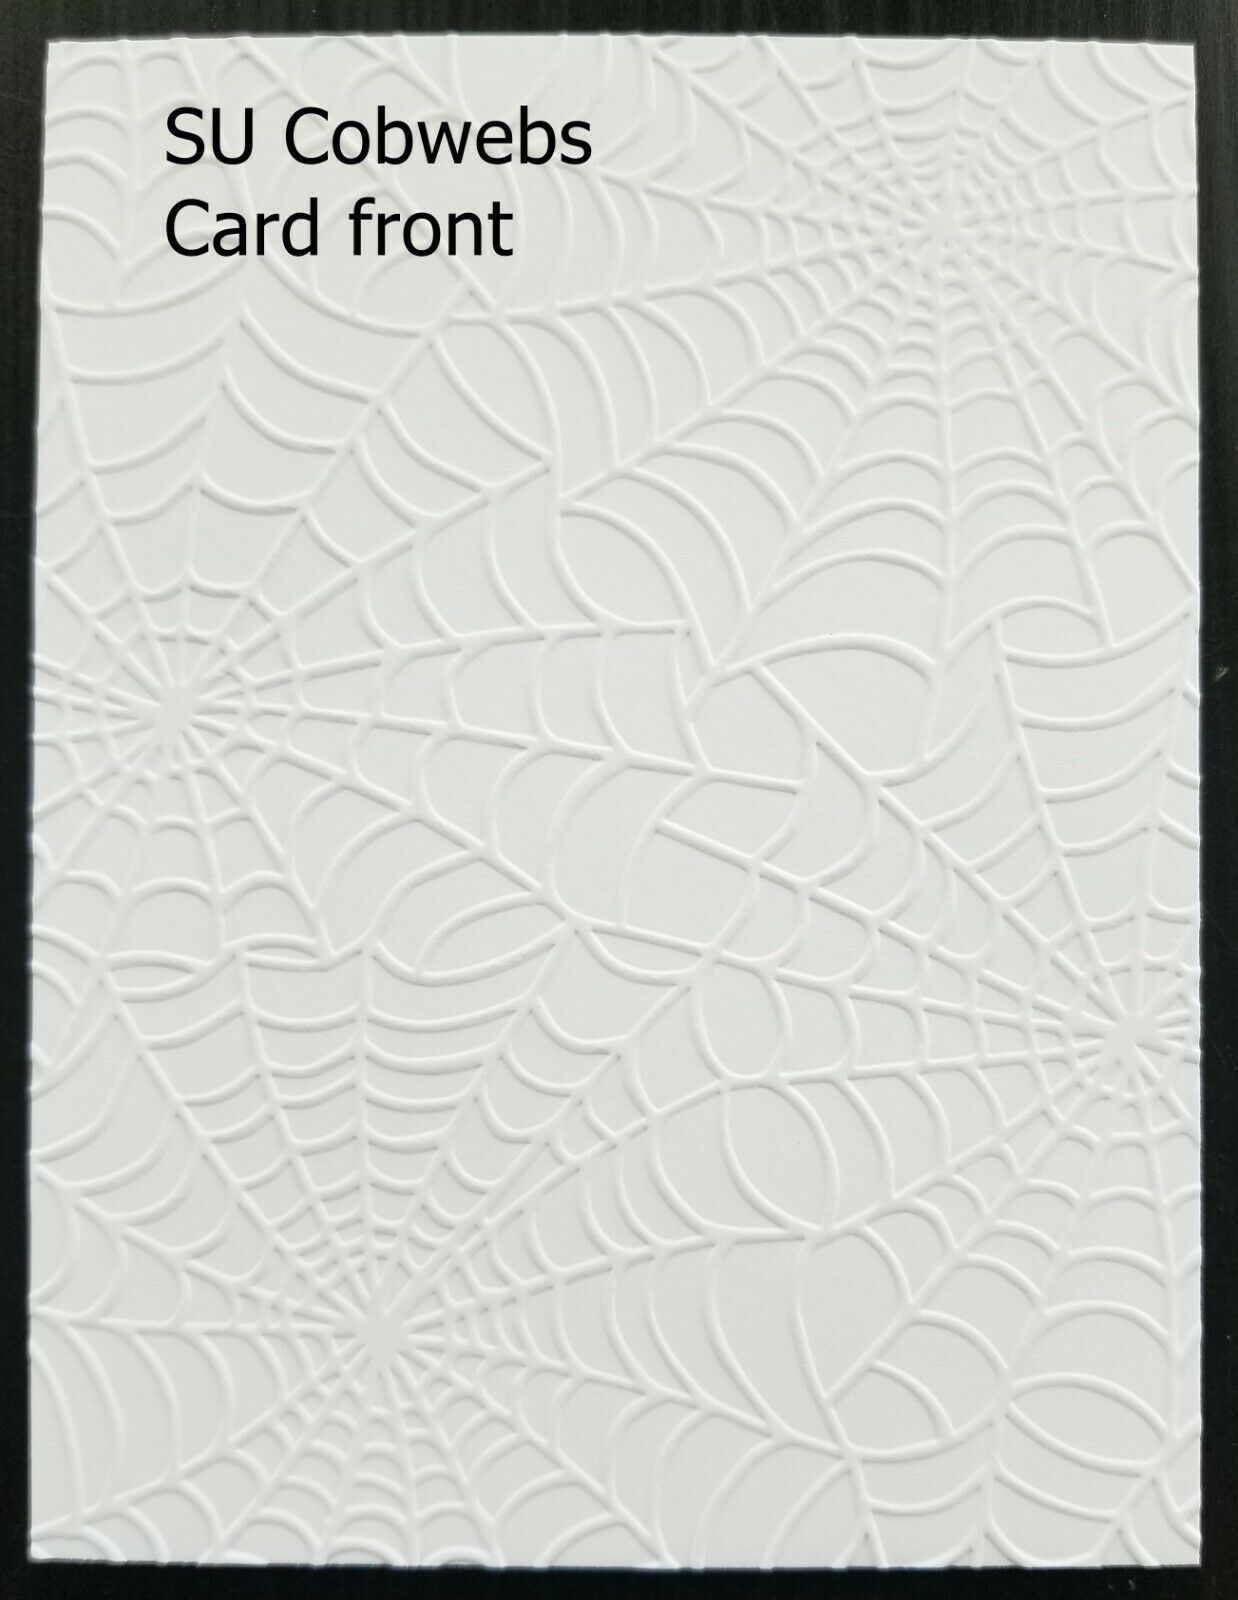 Embossed Holiday Stampin' Up Cardstock Card Fronts, Buy 5 Sets Get 1 Set Free